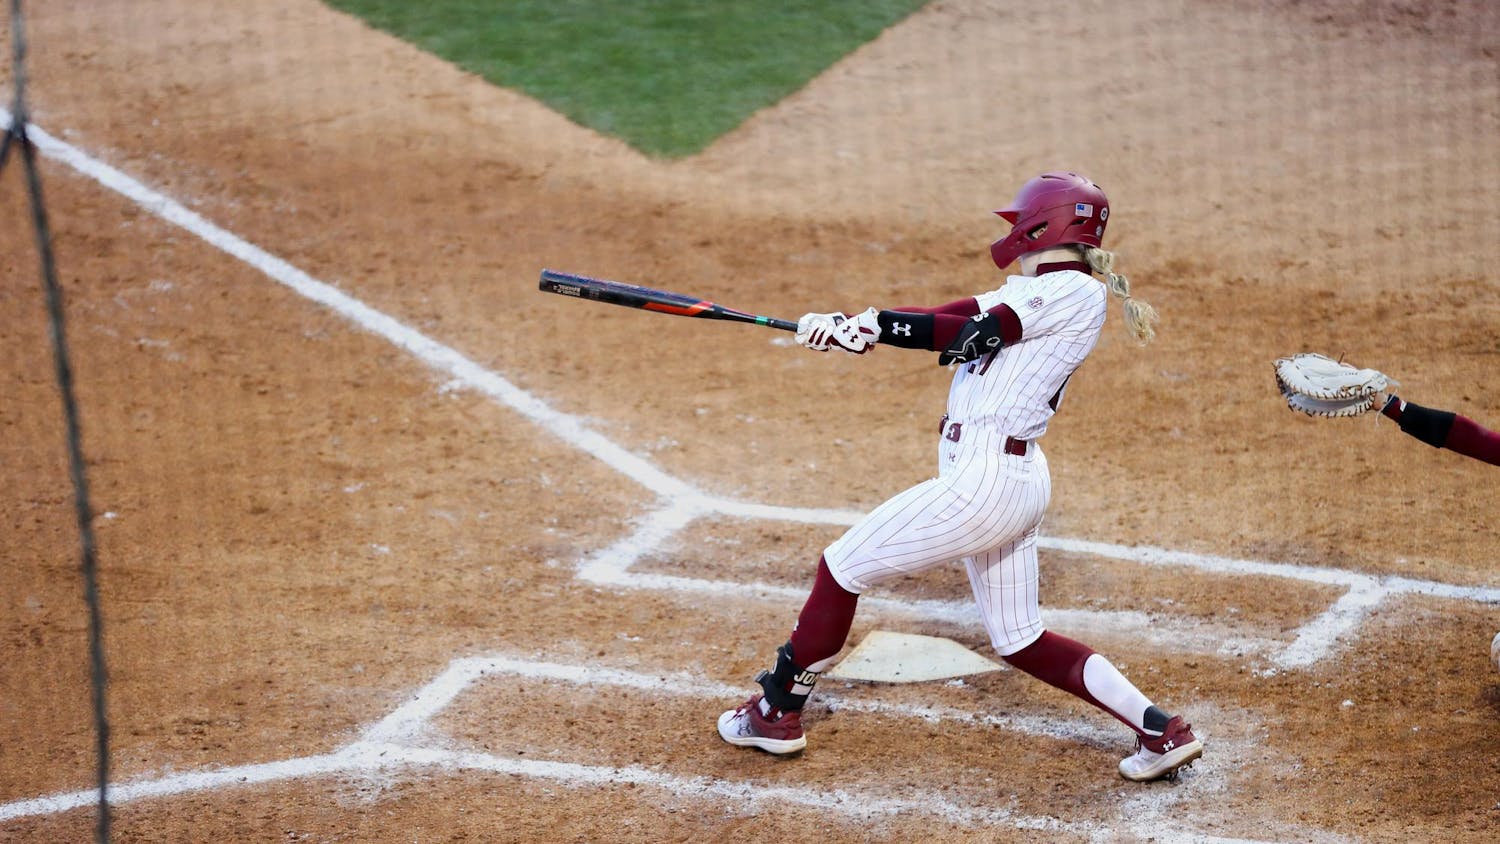 Redshirt senior outfielder Kianna Jones swings during the game against Massachusetts at Beckham Field on Feb. 24, 2024. Jones had one putout and one hit for the Gamecocks during its 5-0 victory over the Minutemen.